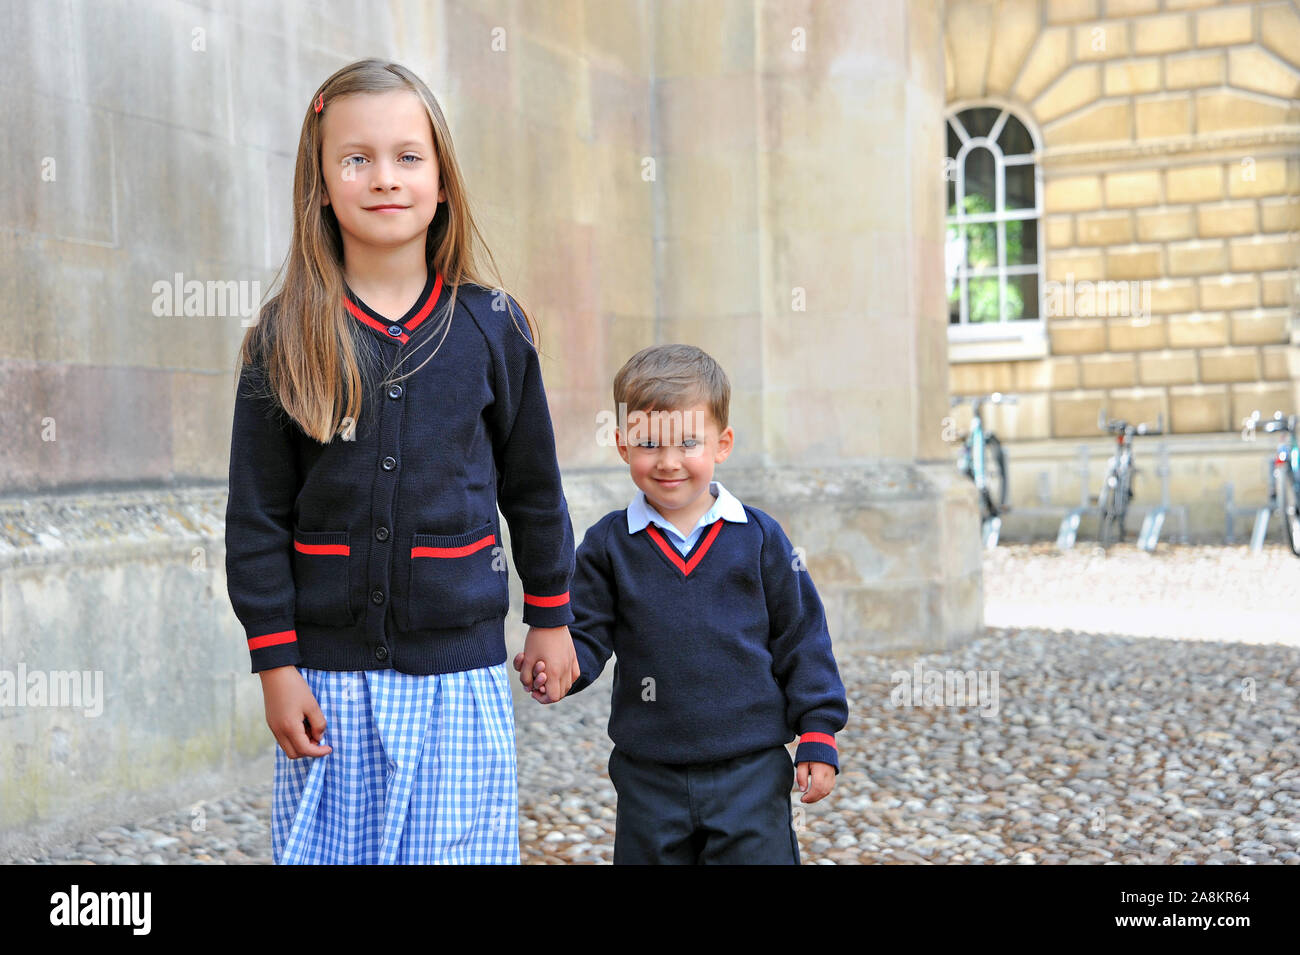 Primary school children ready for school. The younger girl's brother is excited that he finally gets to join his big sister at private school. Stock Photo